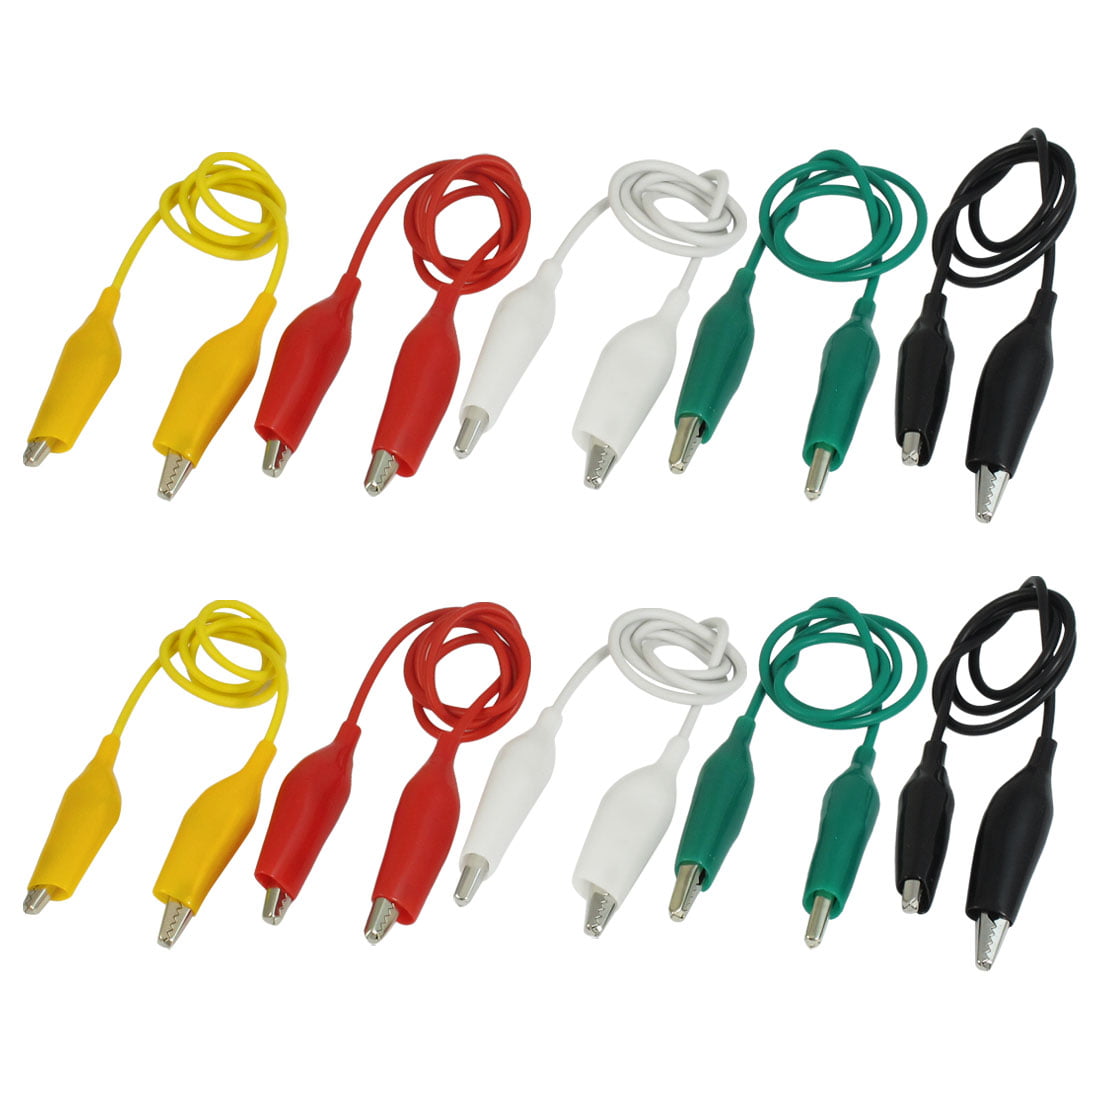 10pcs Double-ended Alligator Crocodile Clips Cable Jumper Wire Test Leads 5color 